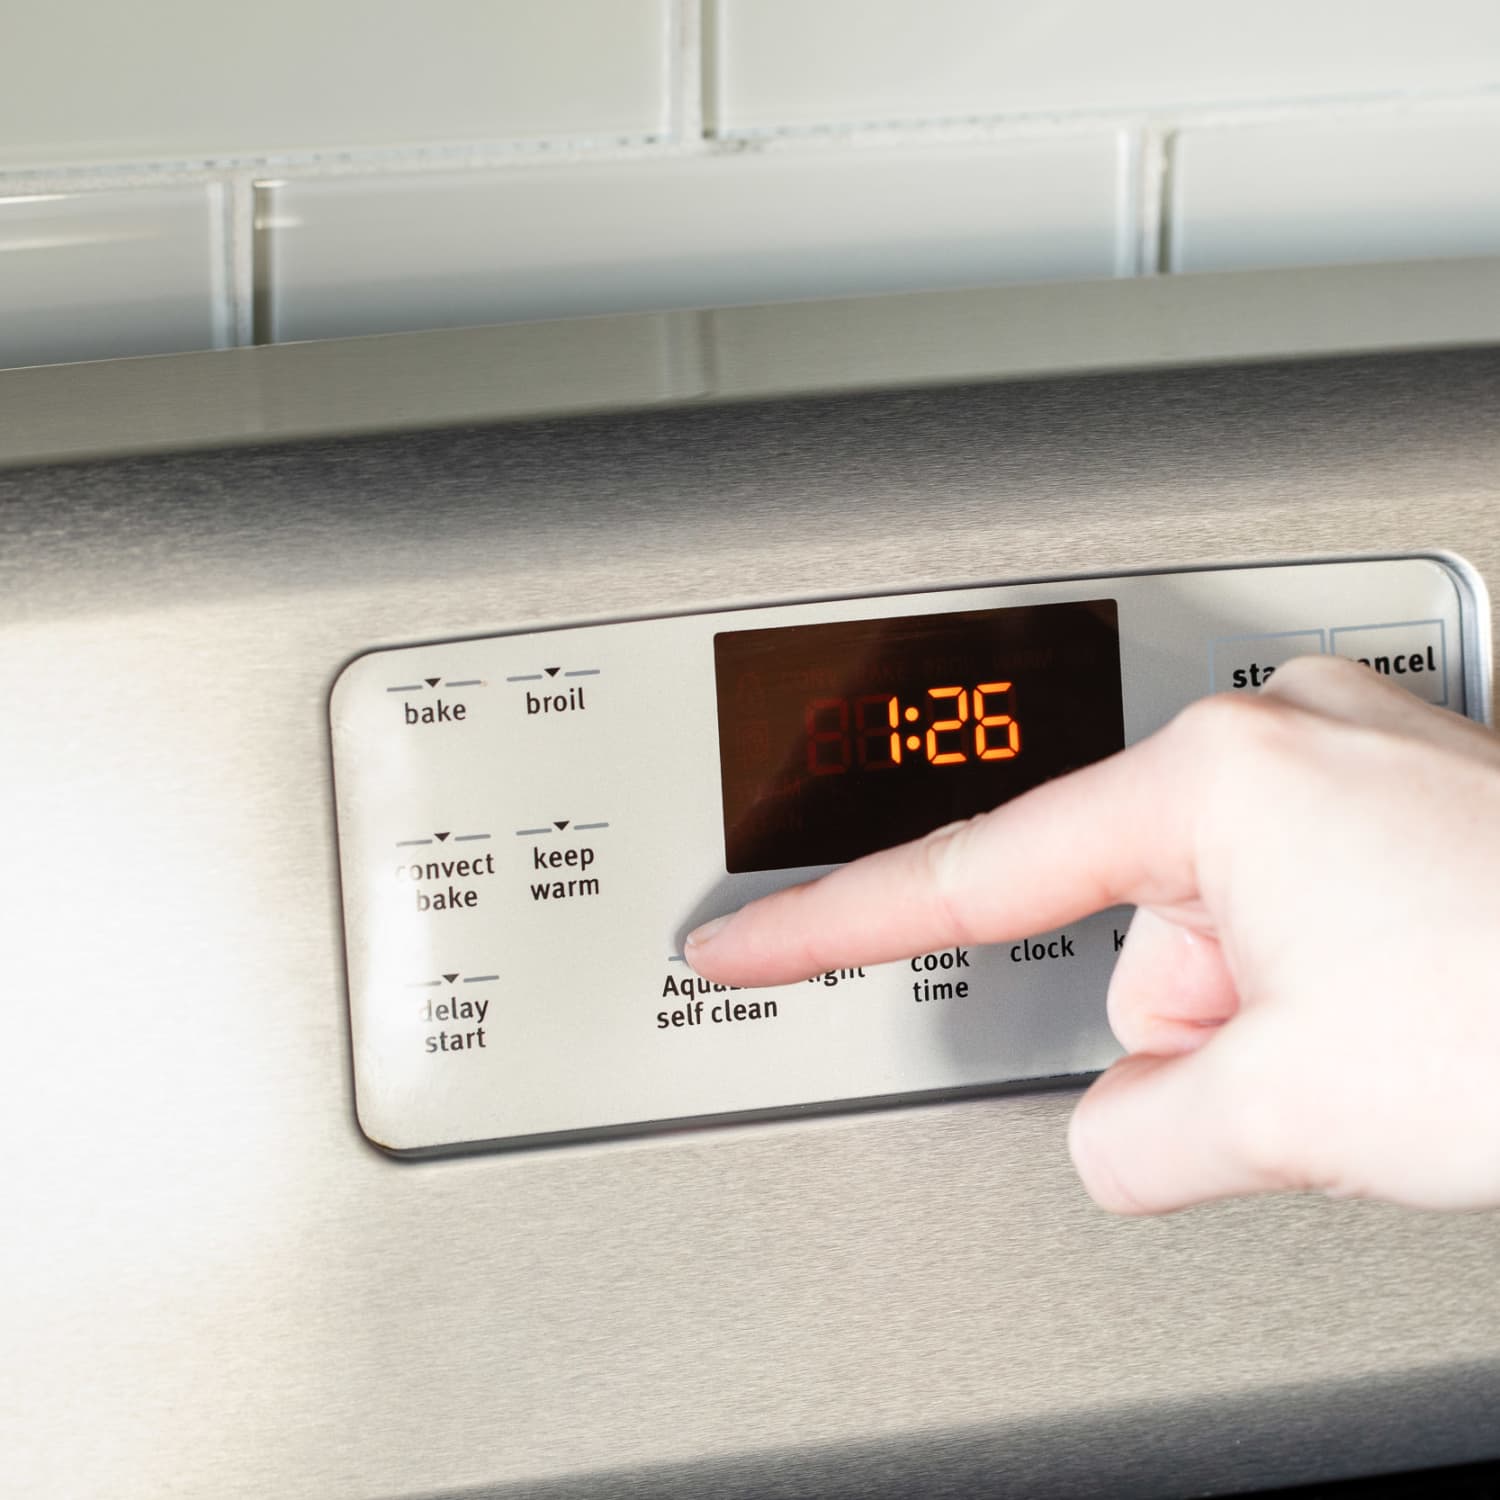 How Does a Self-Cleaning Oven Work?